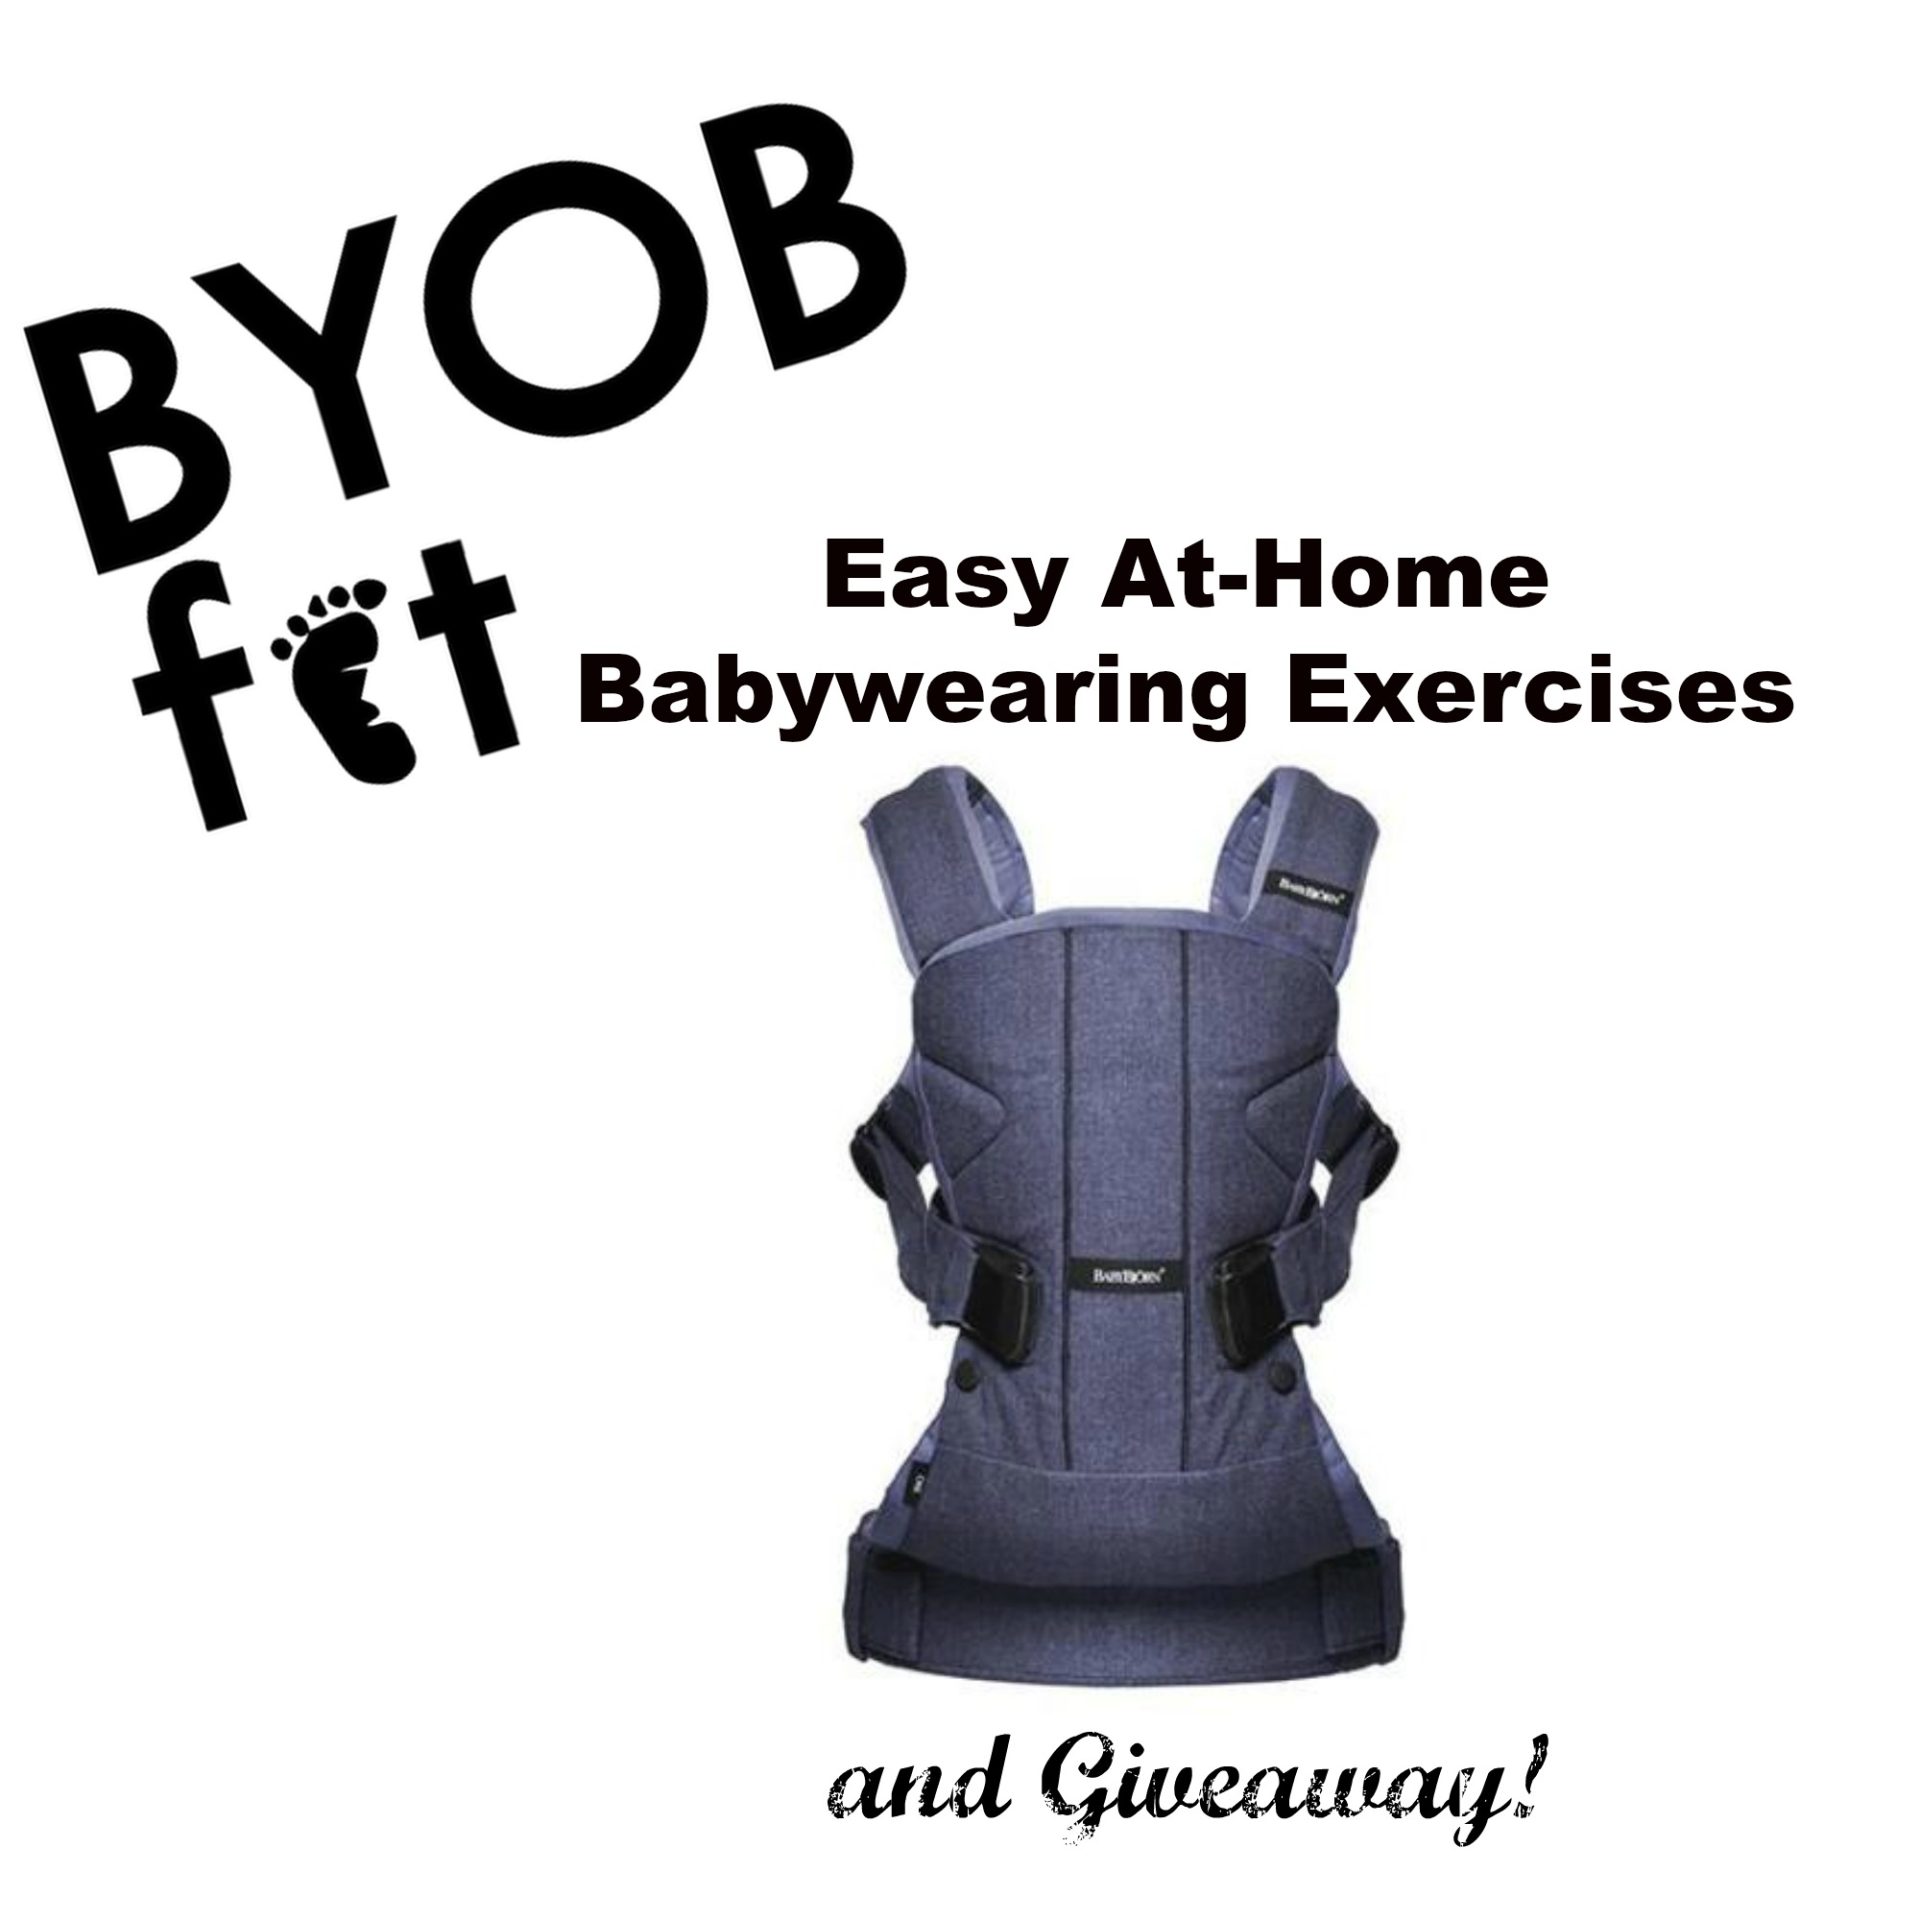 BYOBfit™’s Favorite Babywearing Exercises for the Home